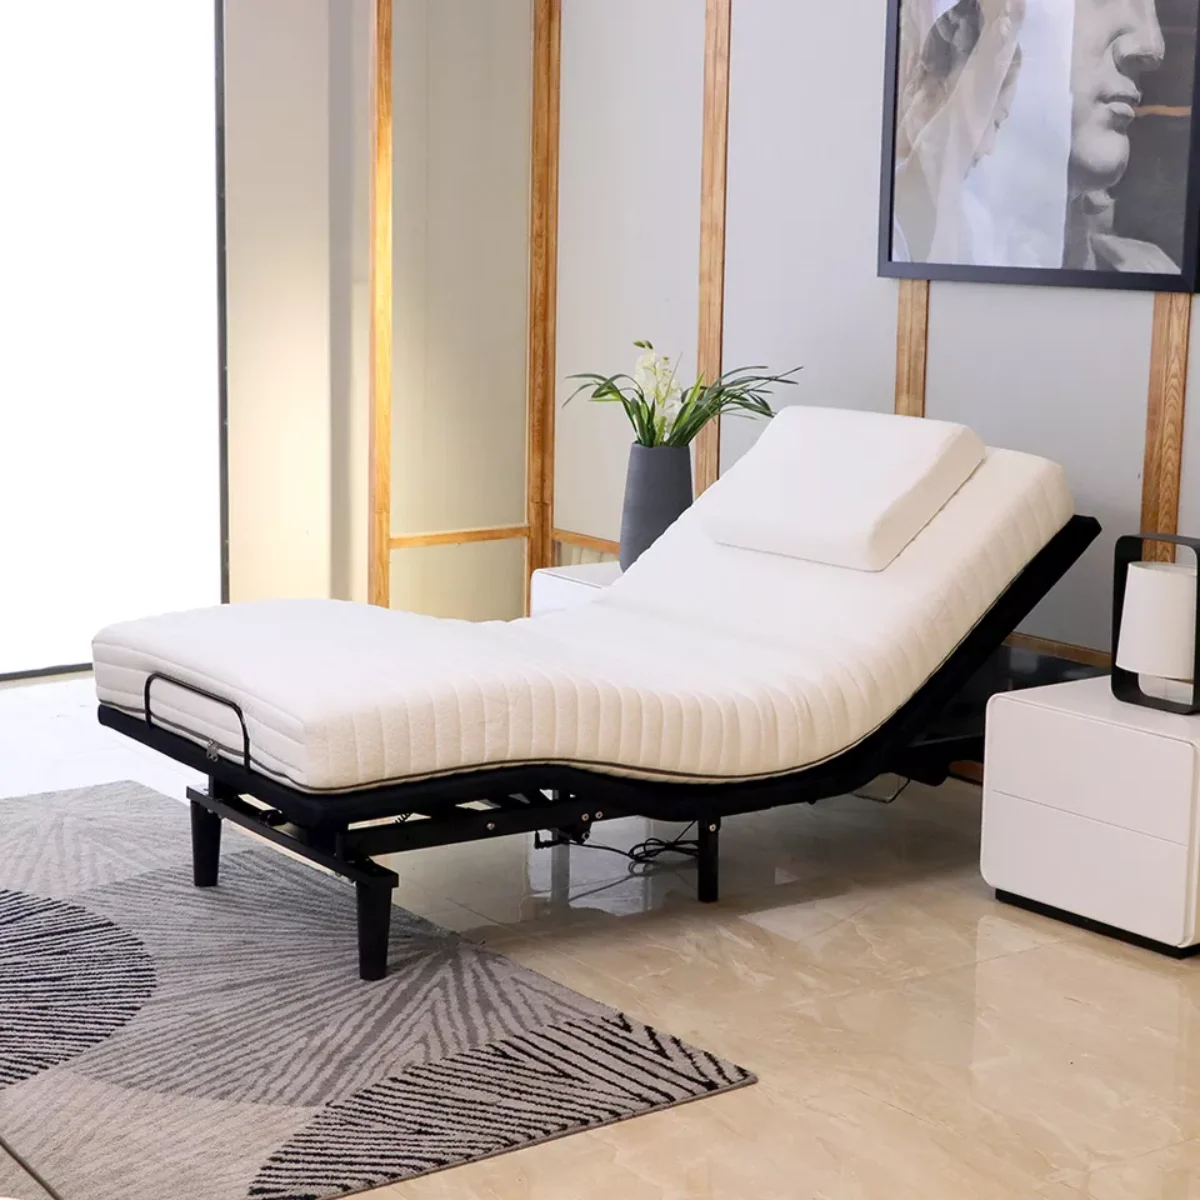 Best Adjustable Beds for Seniors - Buyer's Guide & Reviews - 2020